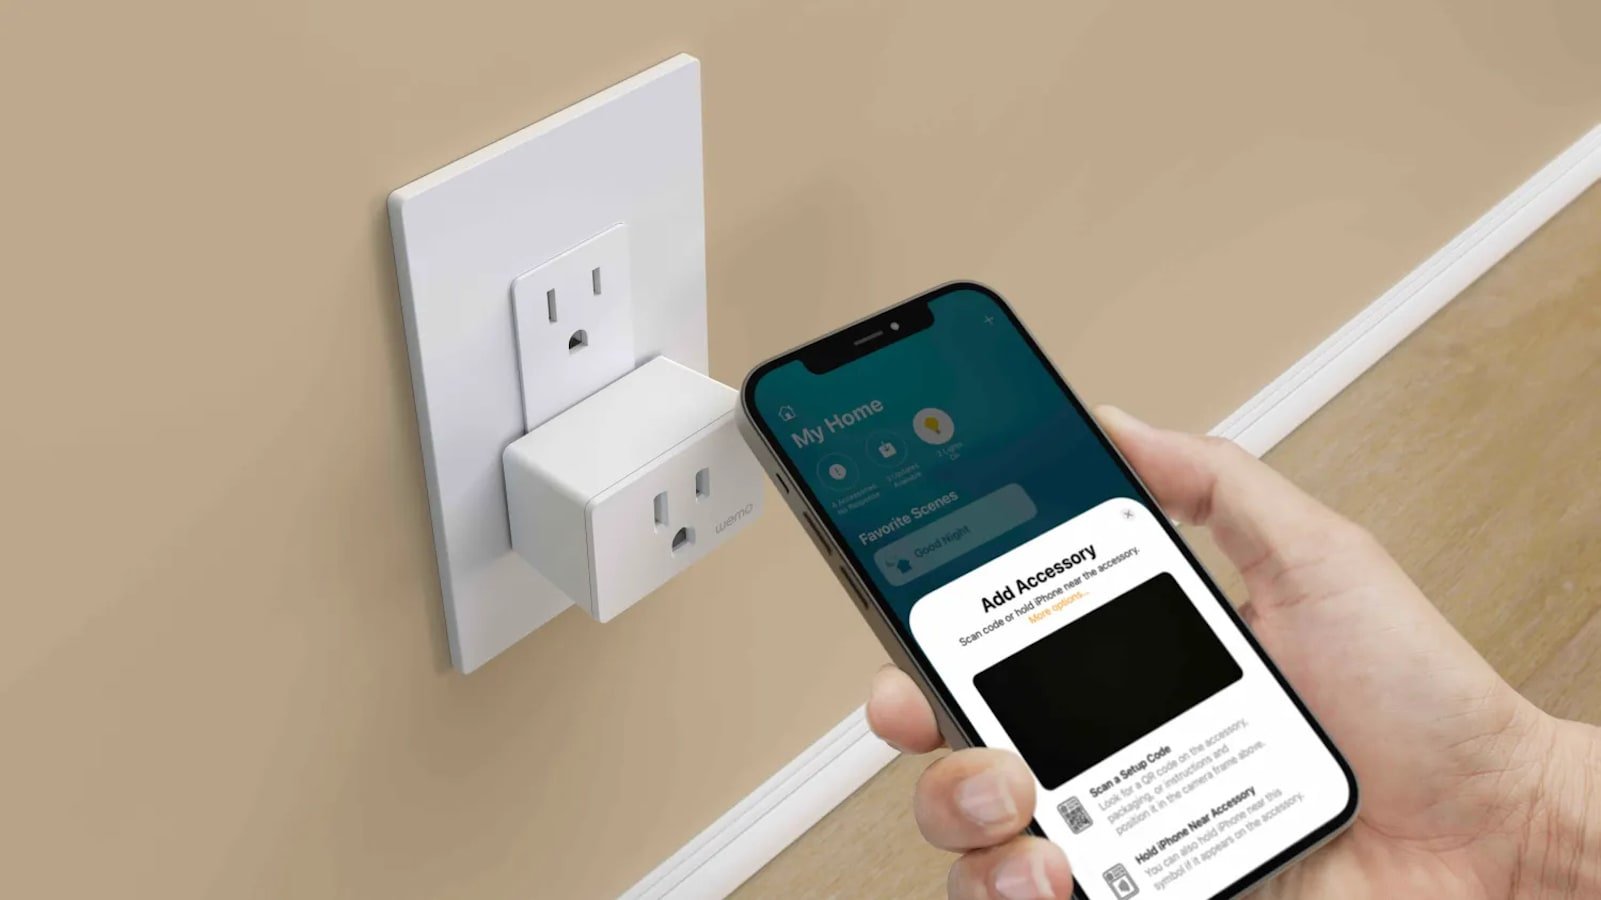 Belkin Wemo Smart Plug with Thread is compatible with Apple HomeKit to control appliances